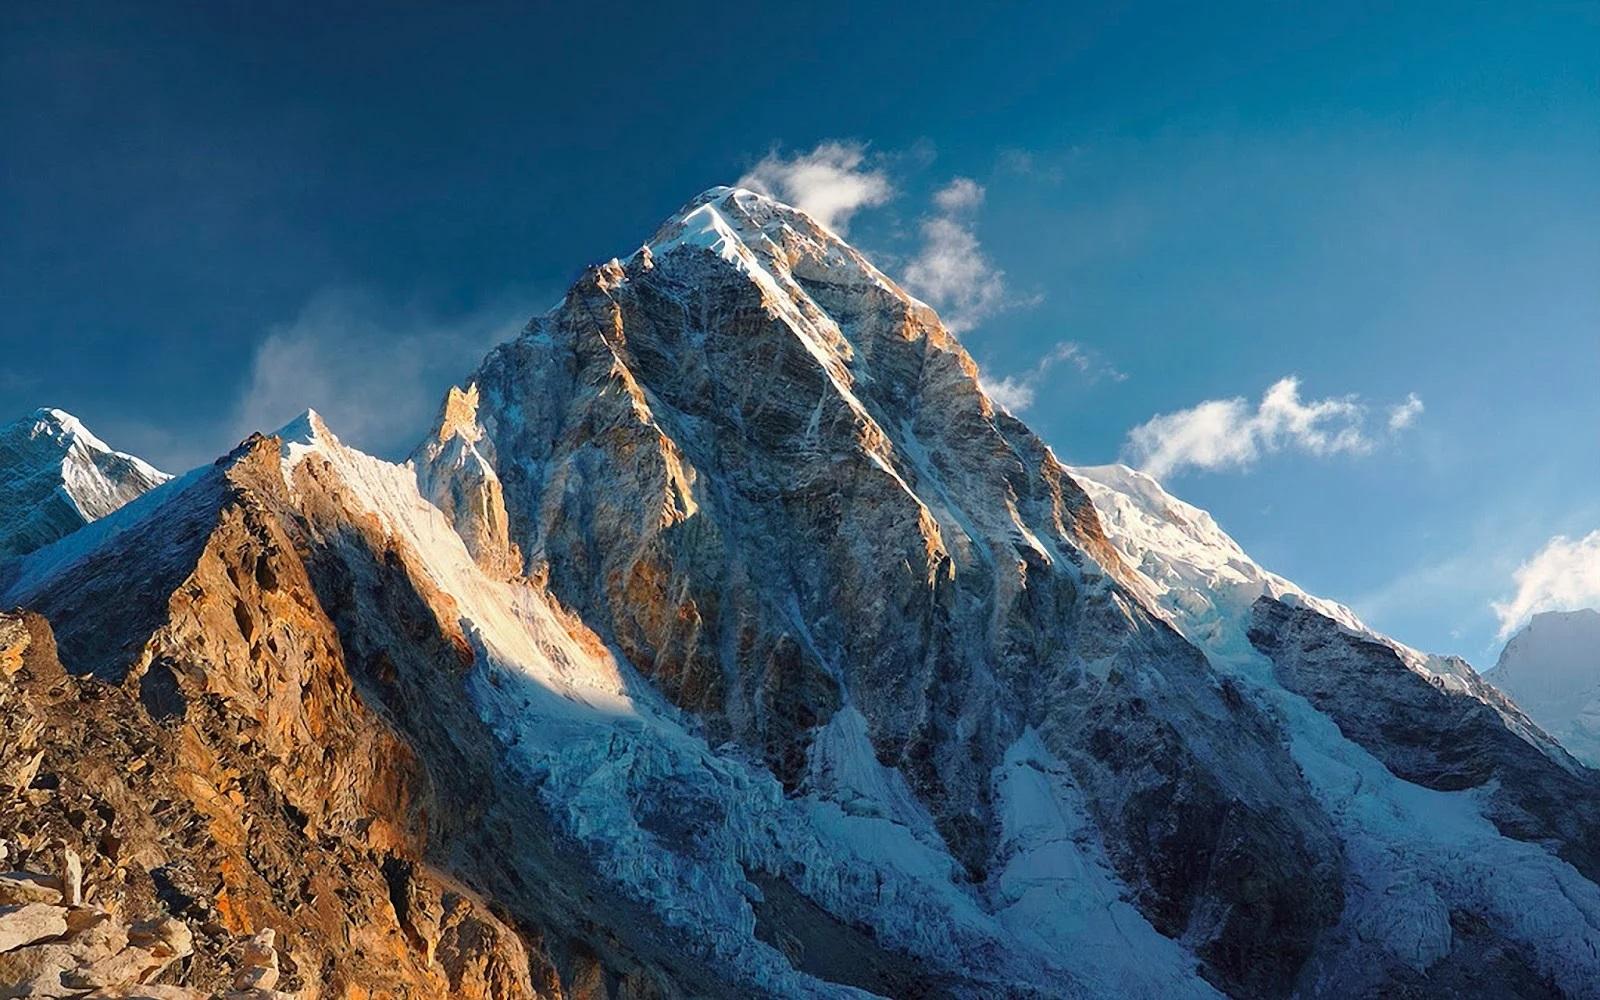 Nepal: The Prowess of the Himalayas